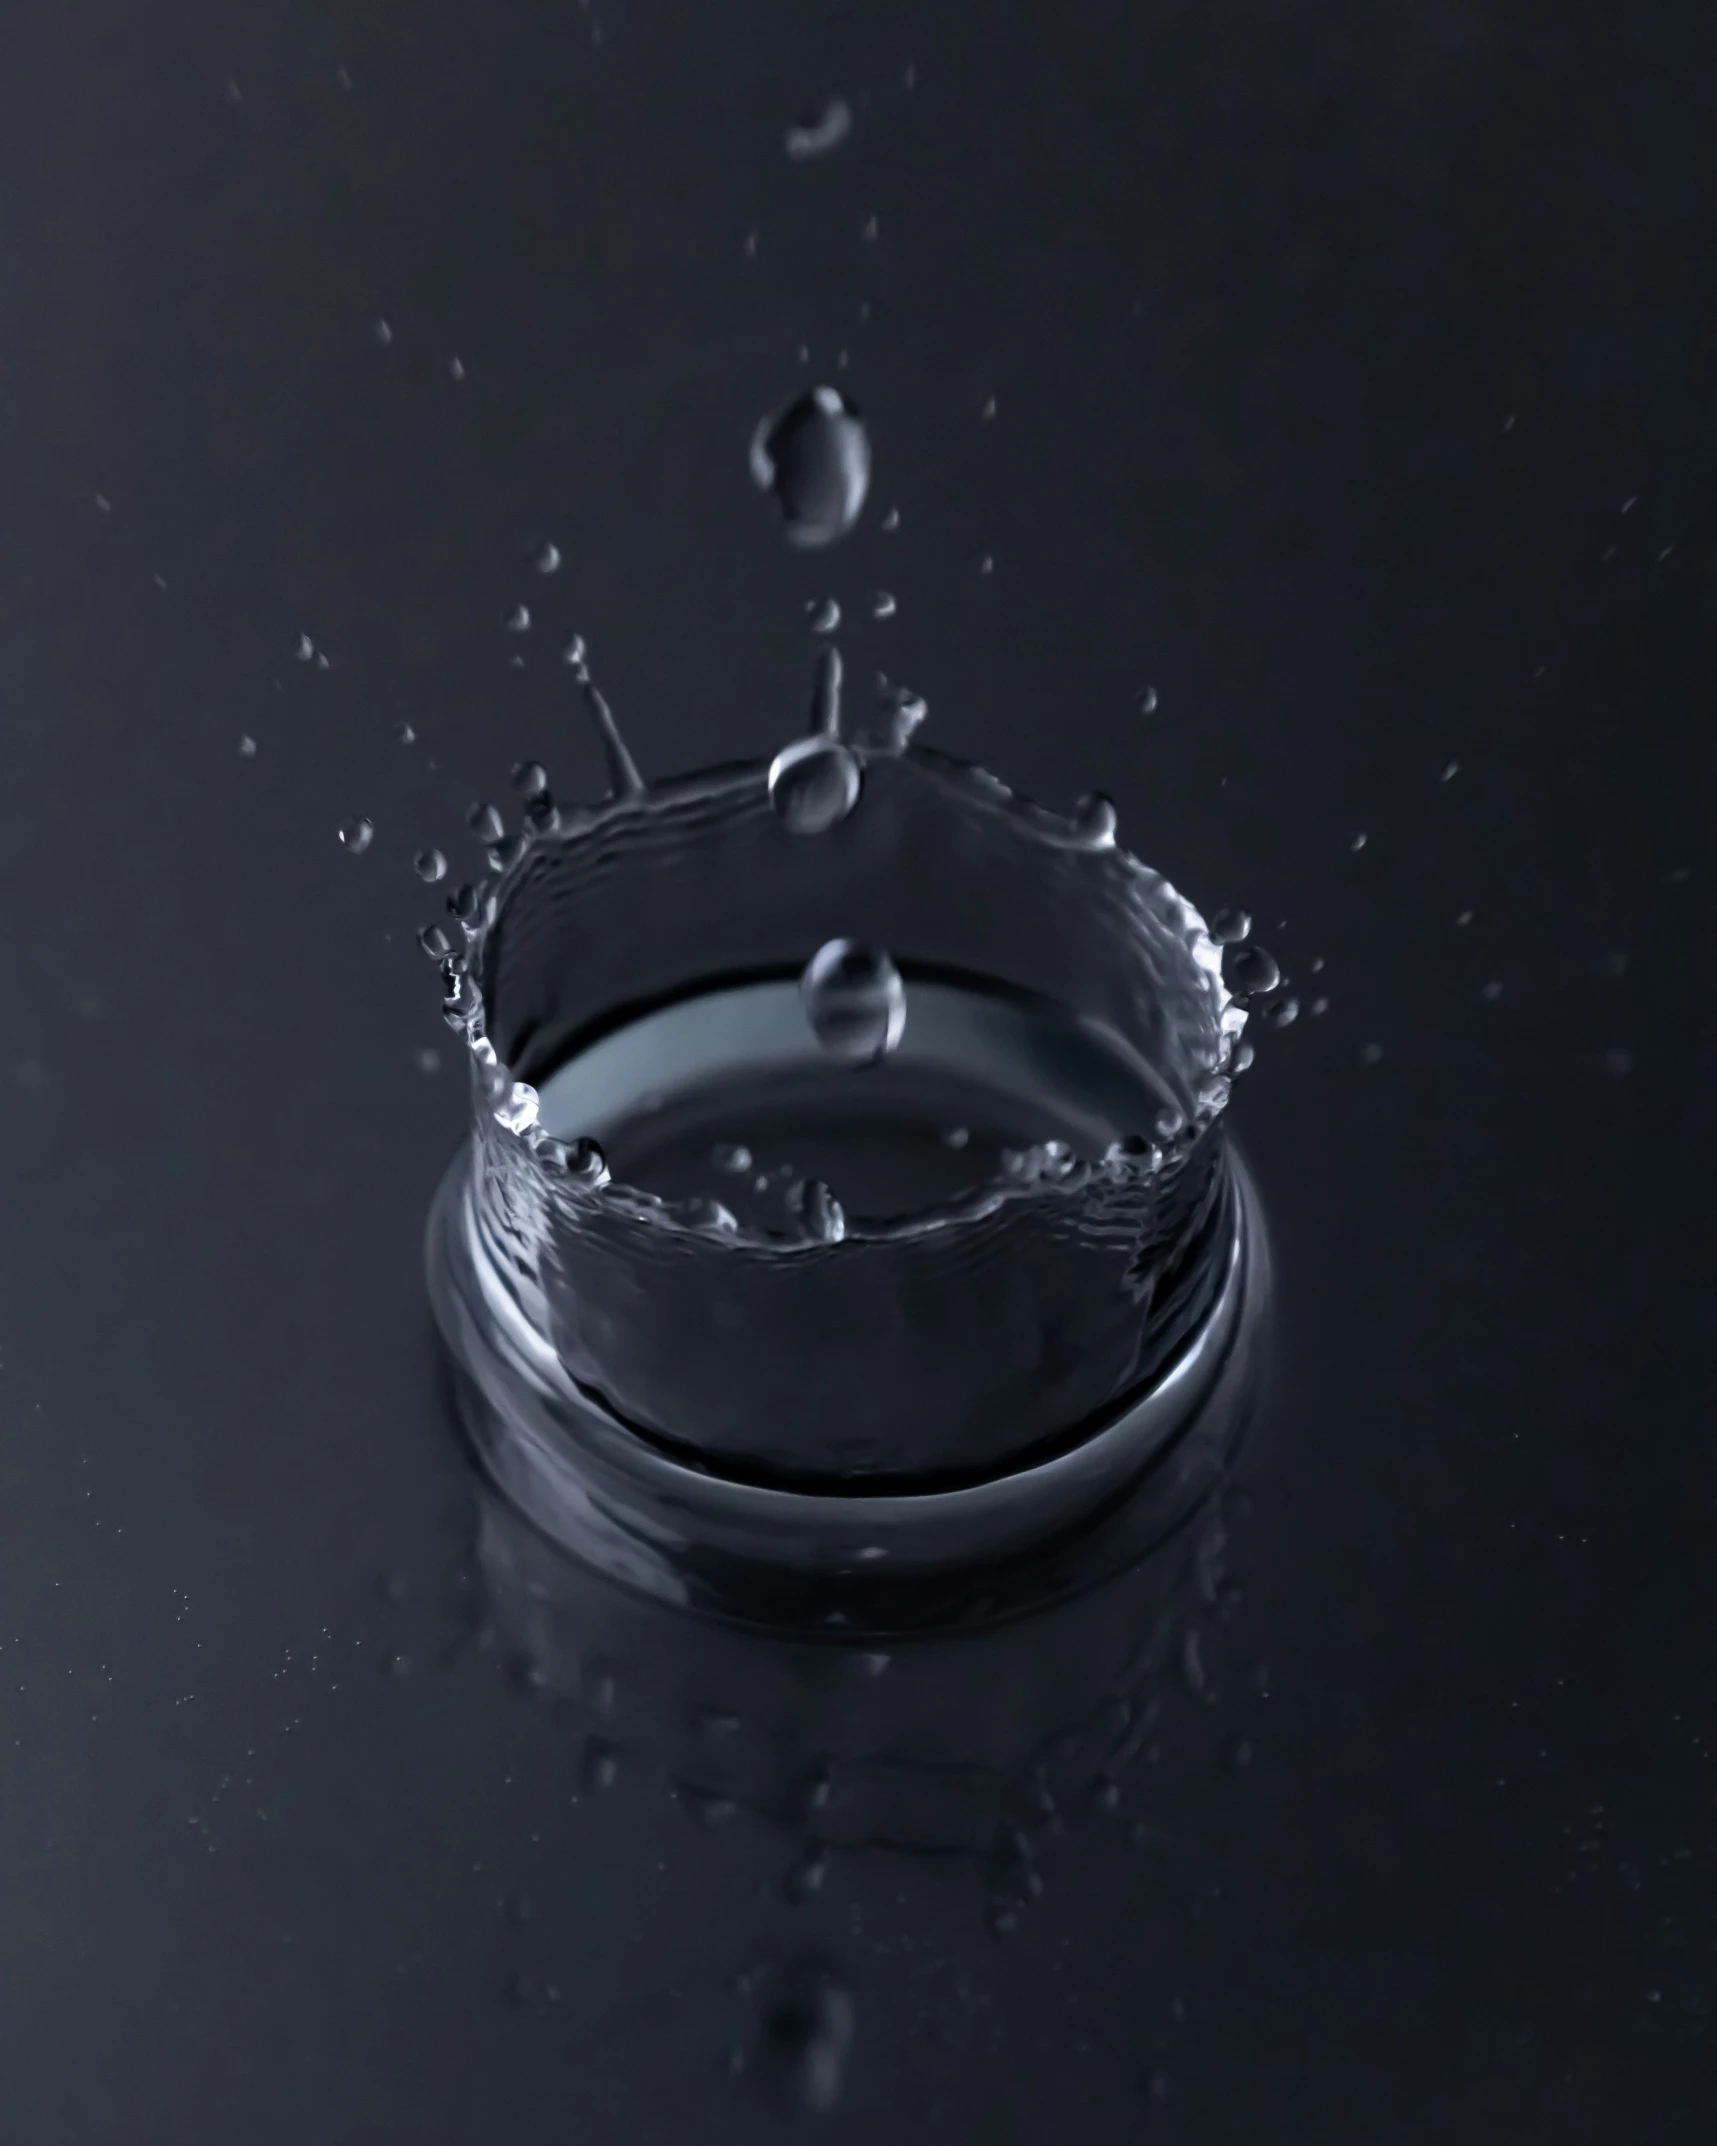 water is splashing on to the surface of a bowl